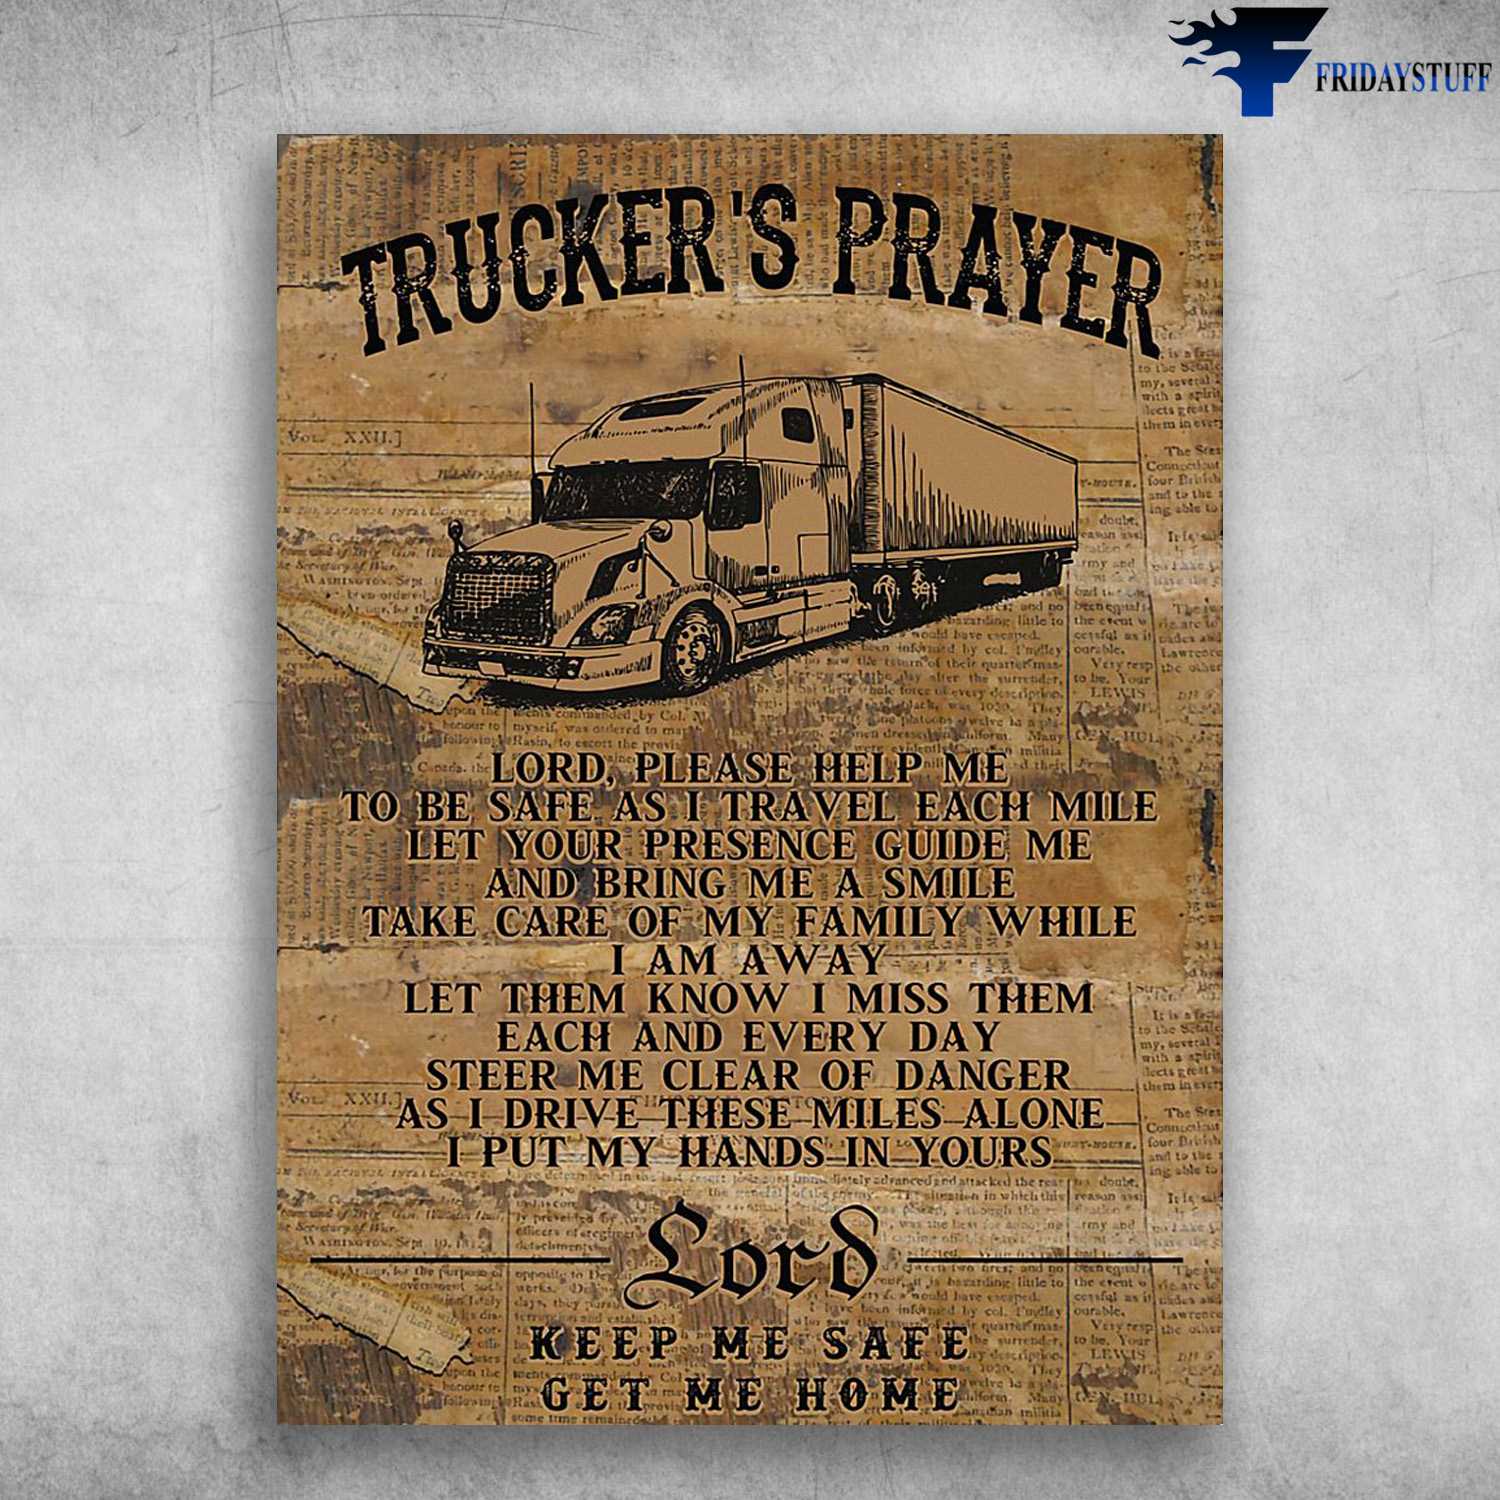 Trucker's Prayer, Trucker Poster, Lord, Please Help Me, To Be Safe As I Travel Each Mile, Let Your Presence Guide Me